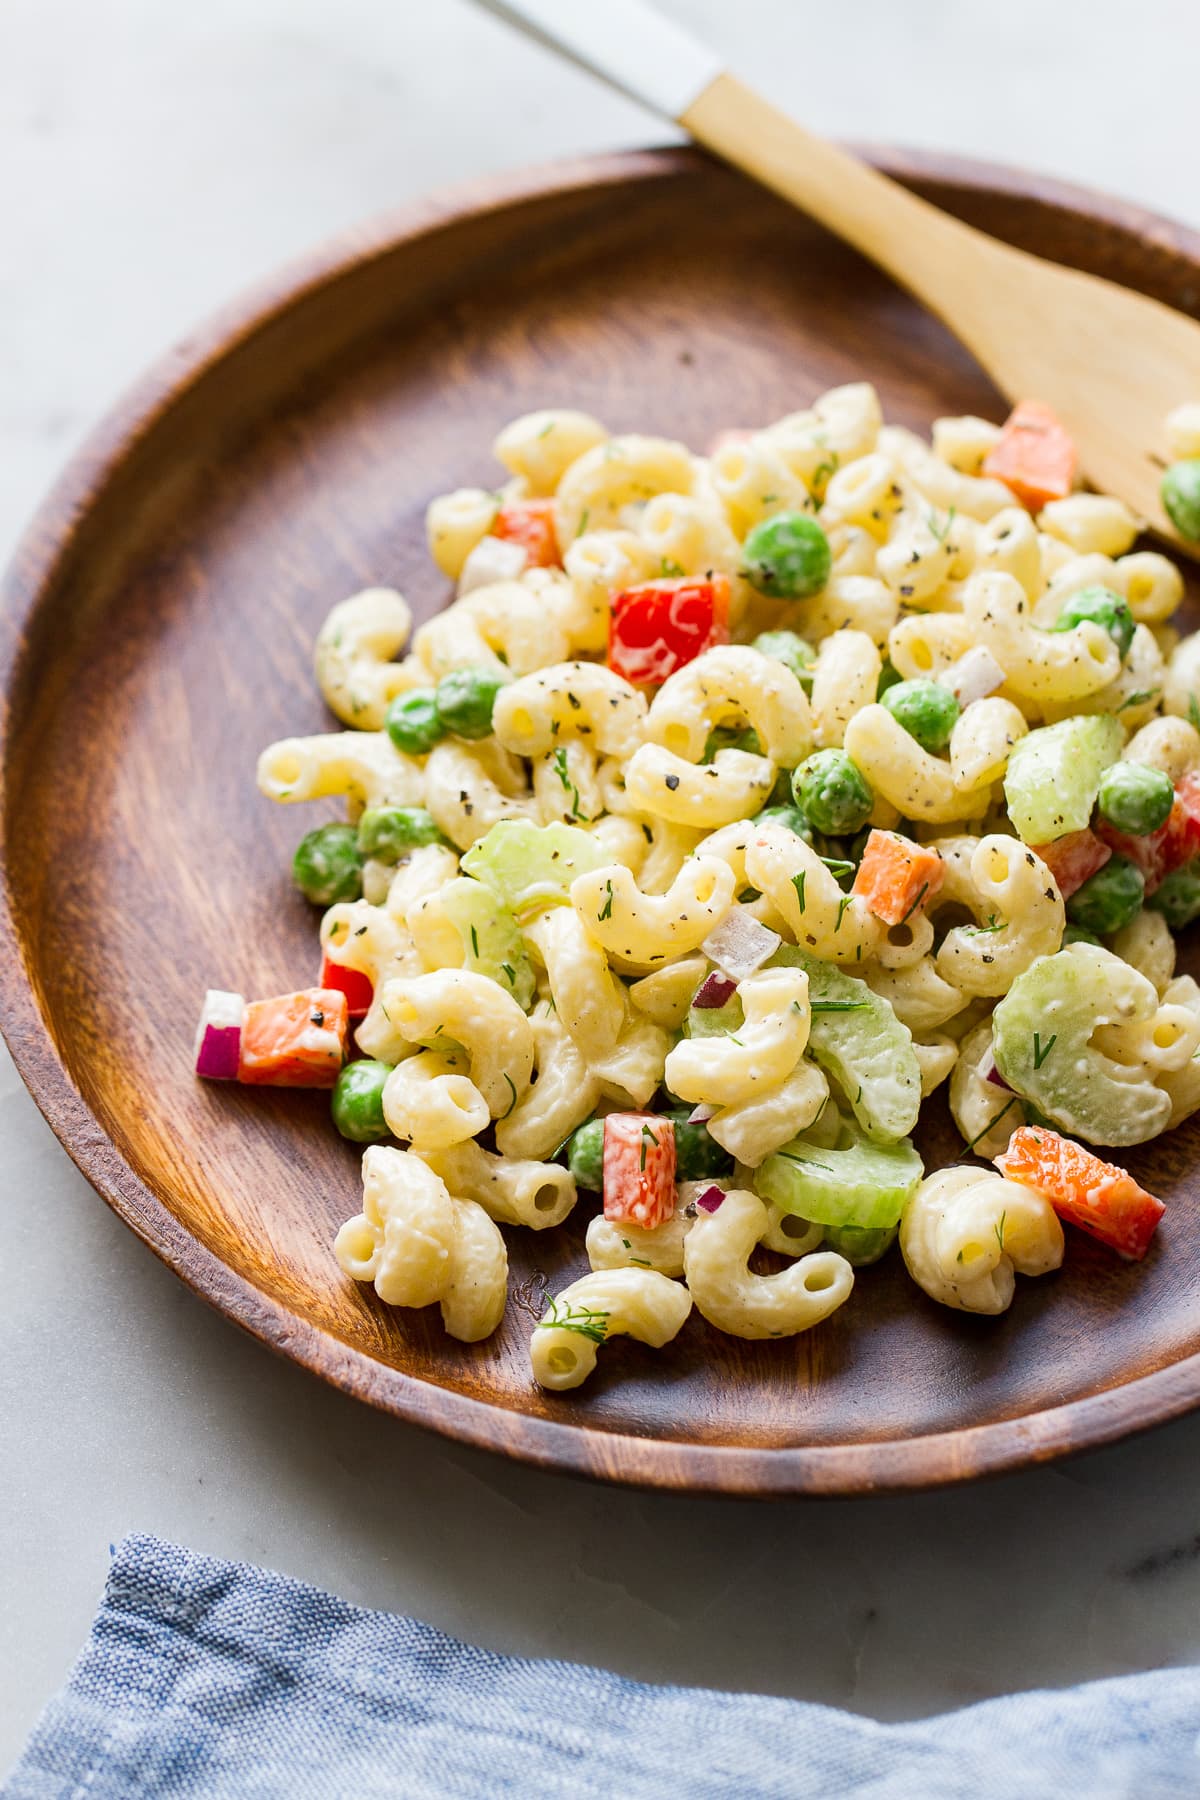 top down view of a serving of creamy vegan macaroni salad in a wooden plate.